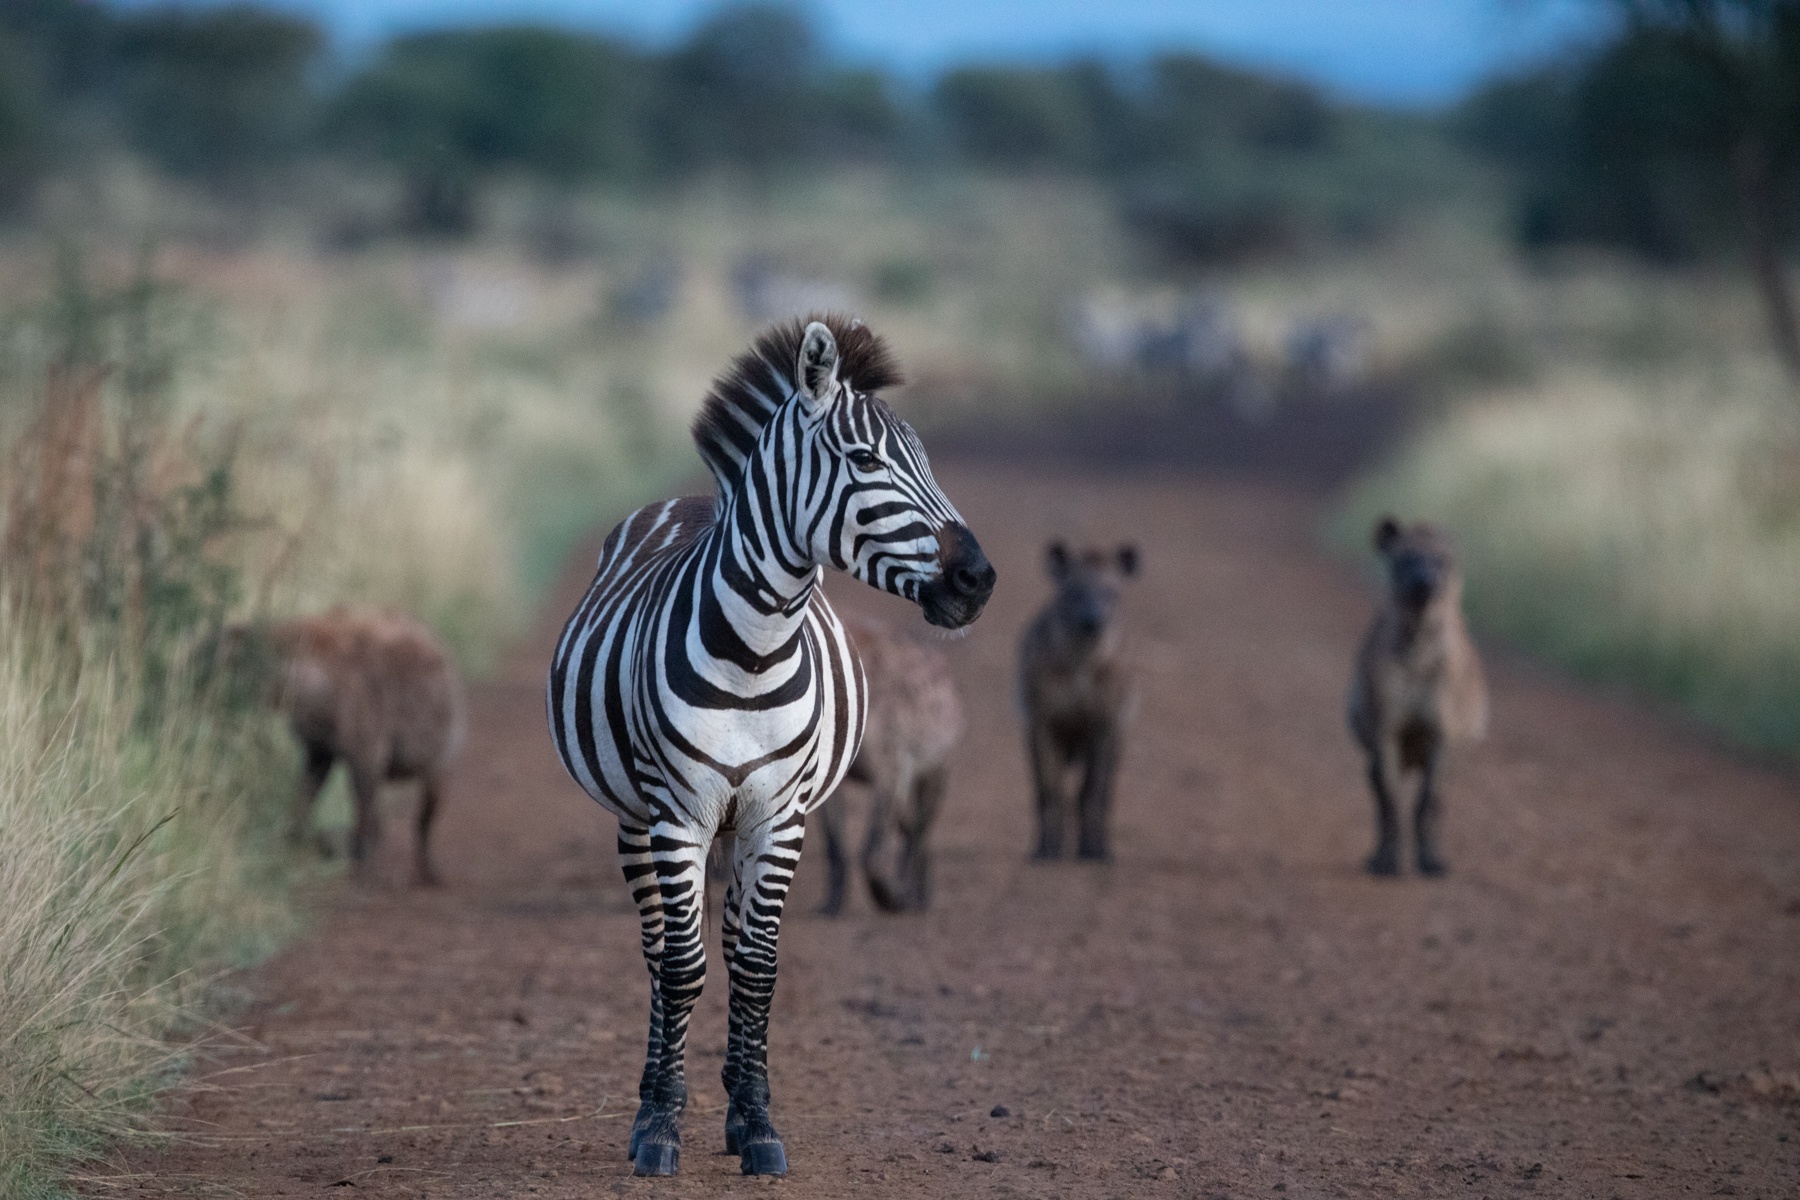 A zebra contemplates a menacing pack of hyenas on one of our early morning safaris in the Serengeti